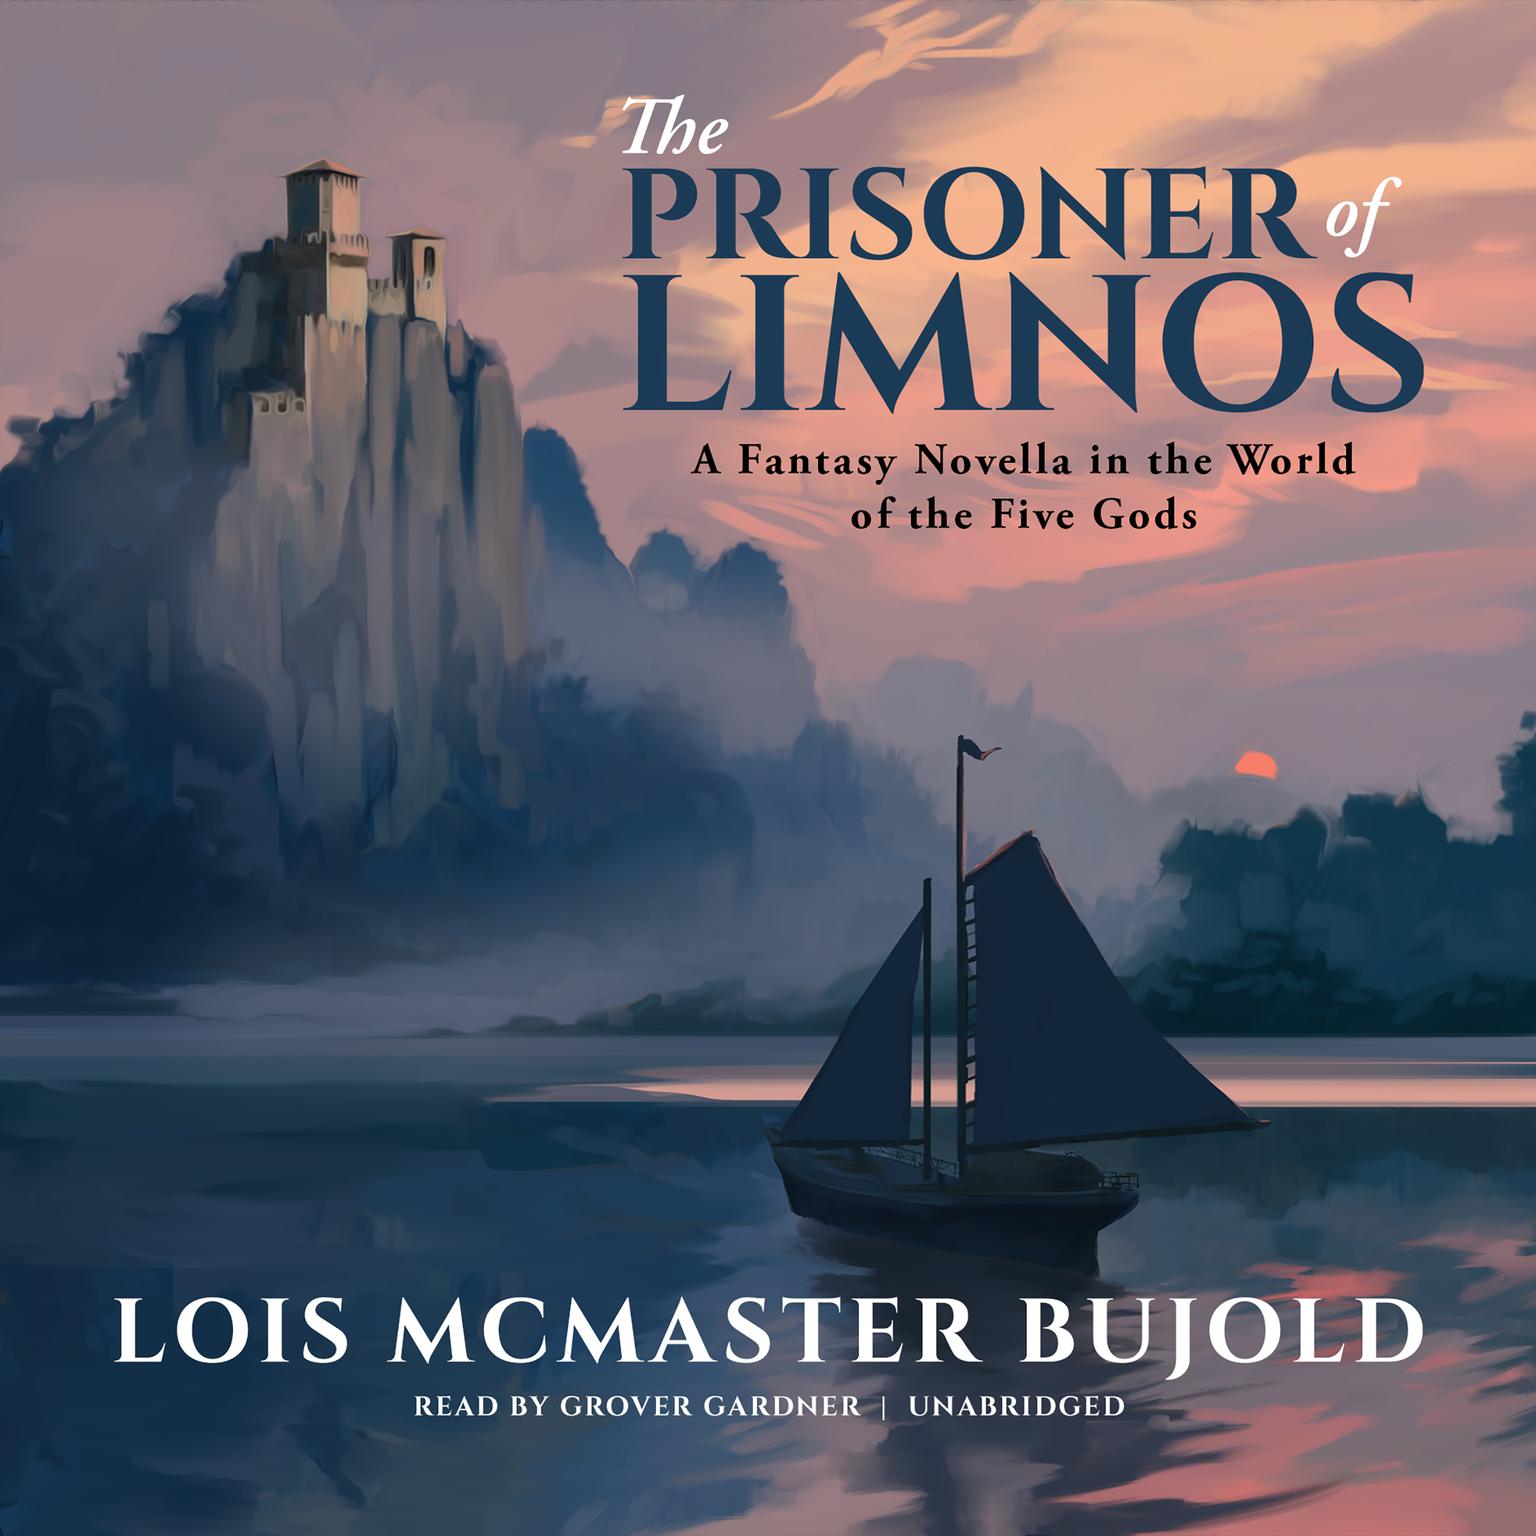 The Prisoner of Limnos: A Fantasy Novella in the World of the Five Gods Audiobook, by Lois McMaster Bujold